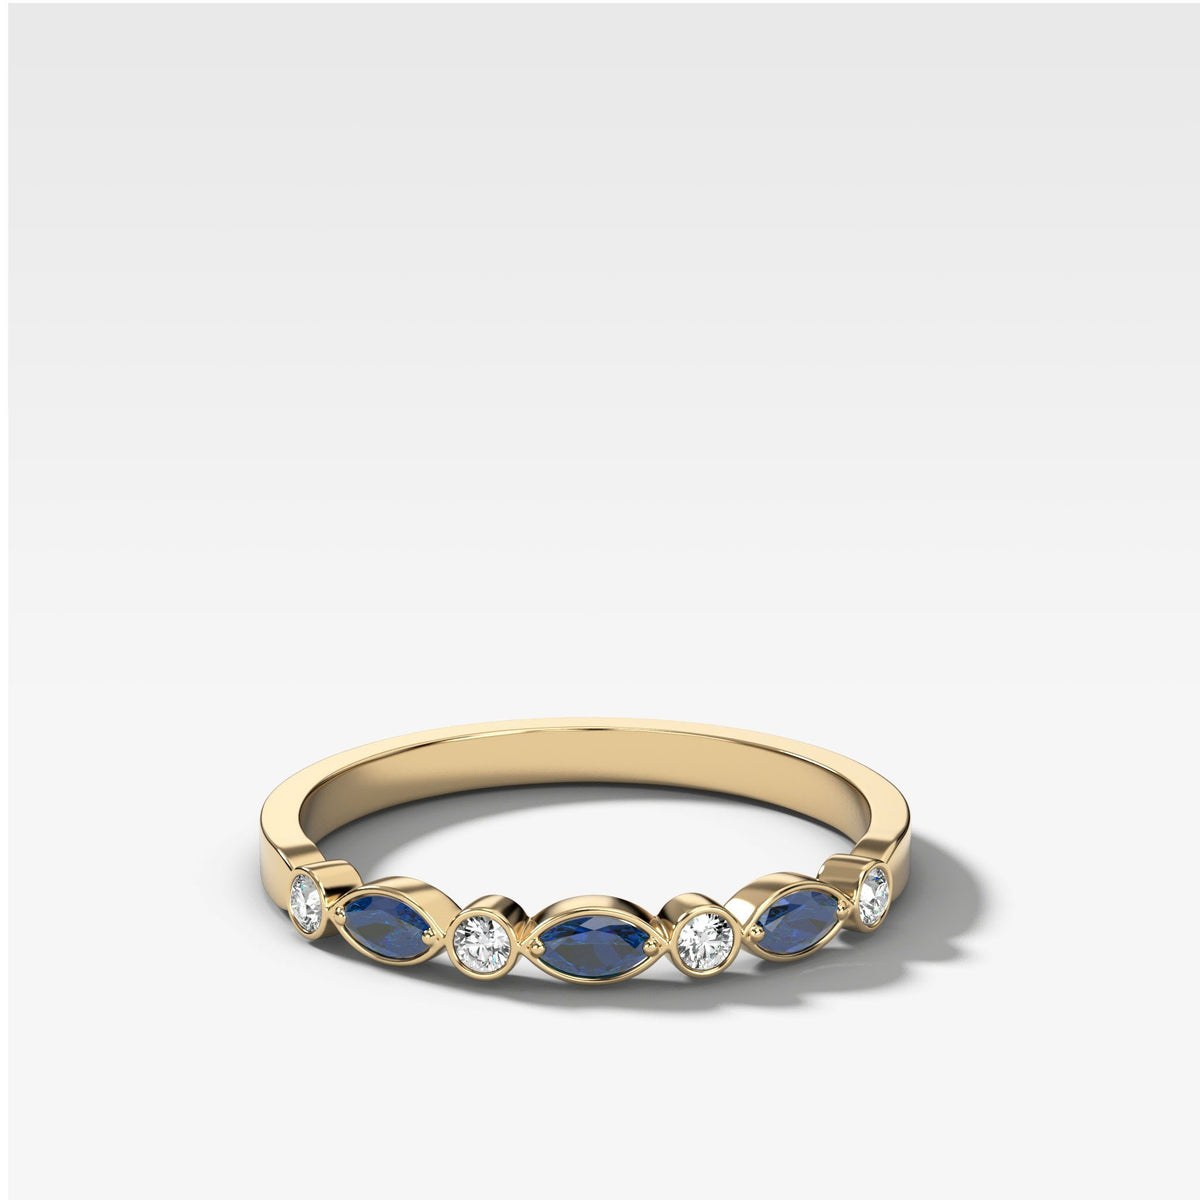 Diamond And Sapphire Tiara Bezel Set Wedding Band by Good Stone in Yellow Gold